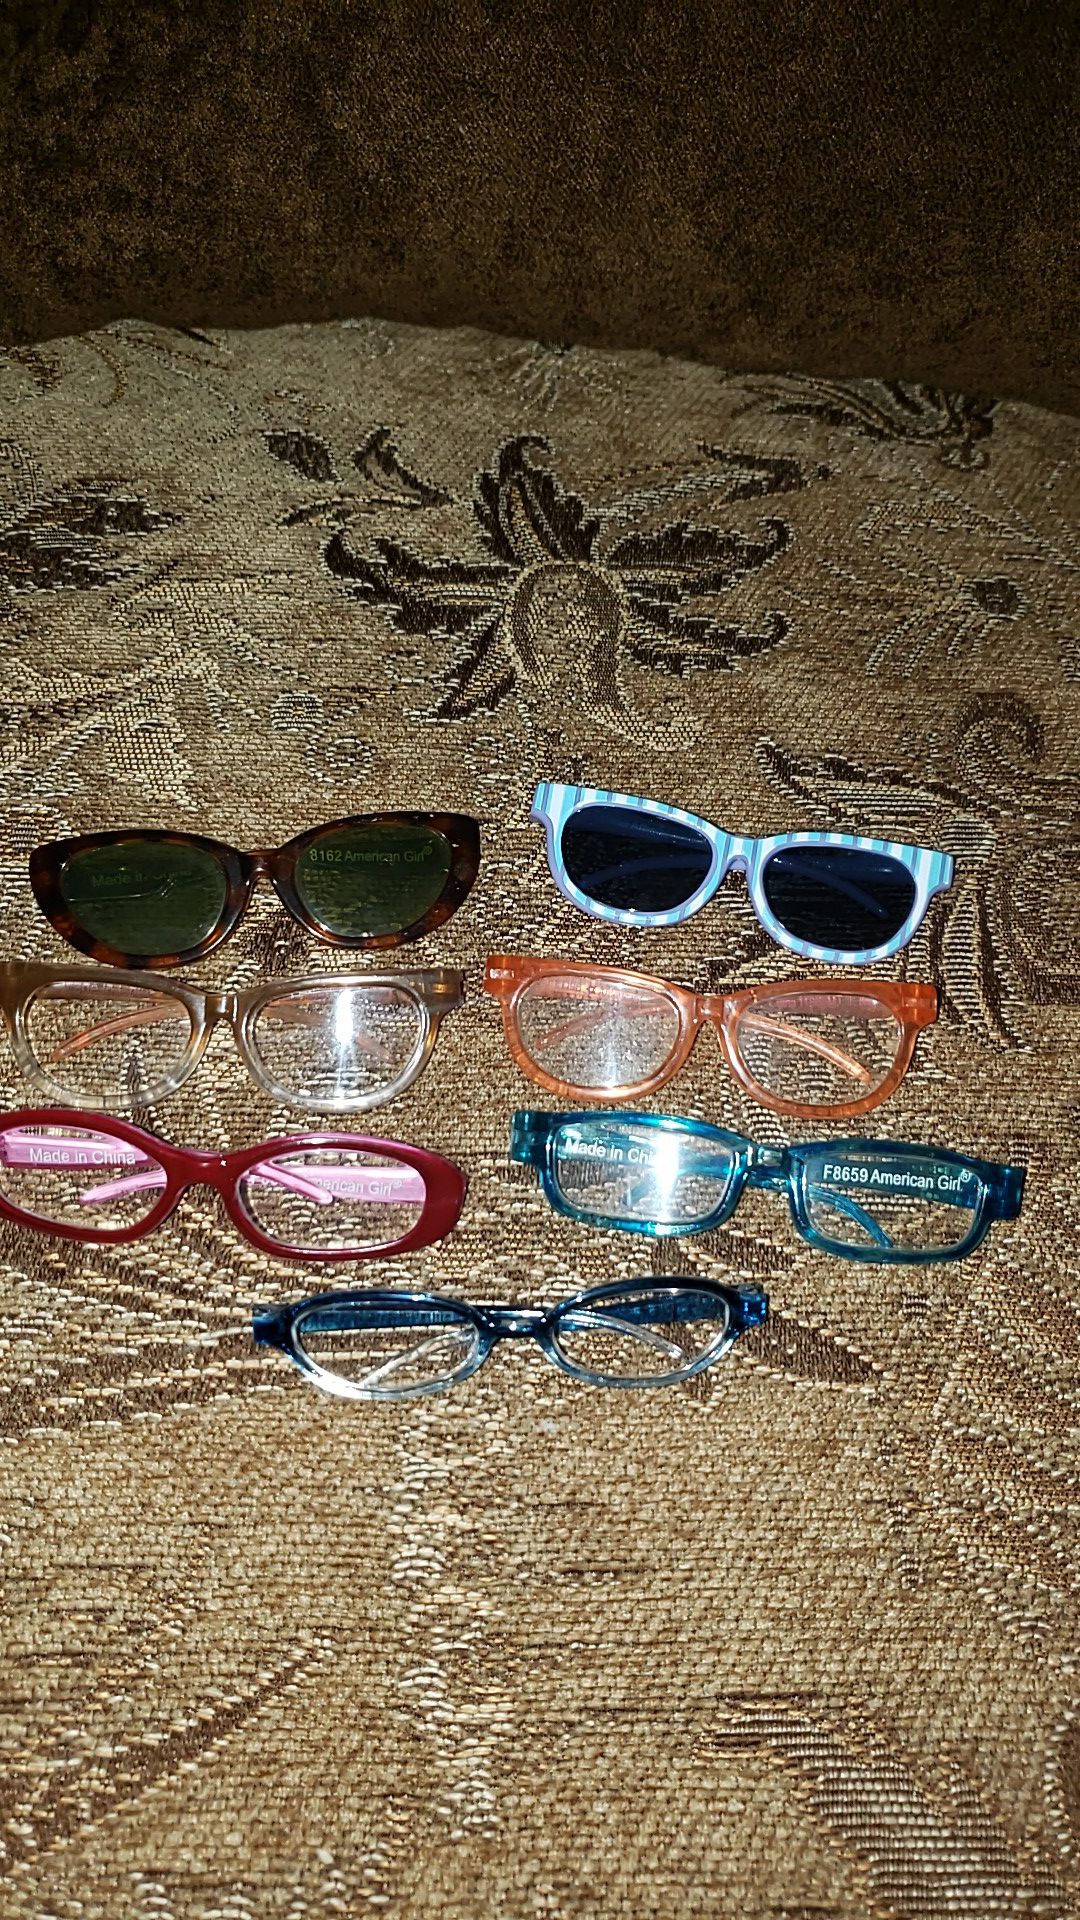 American girl doll /sunglasses and glasses